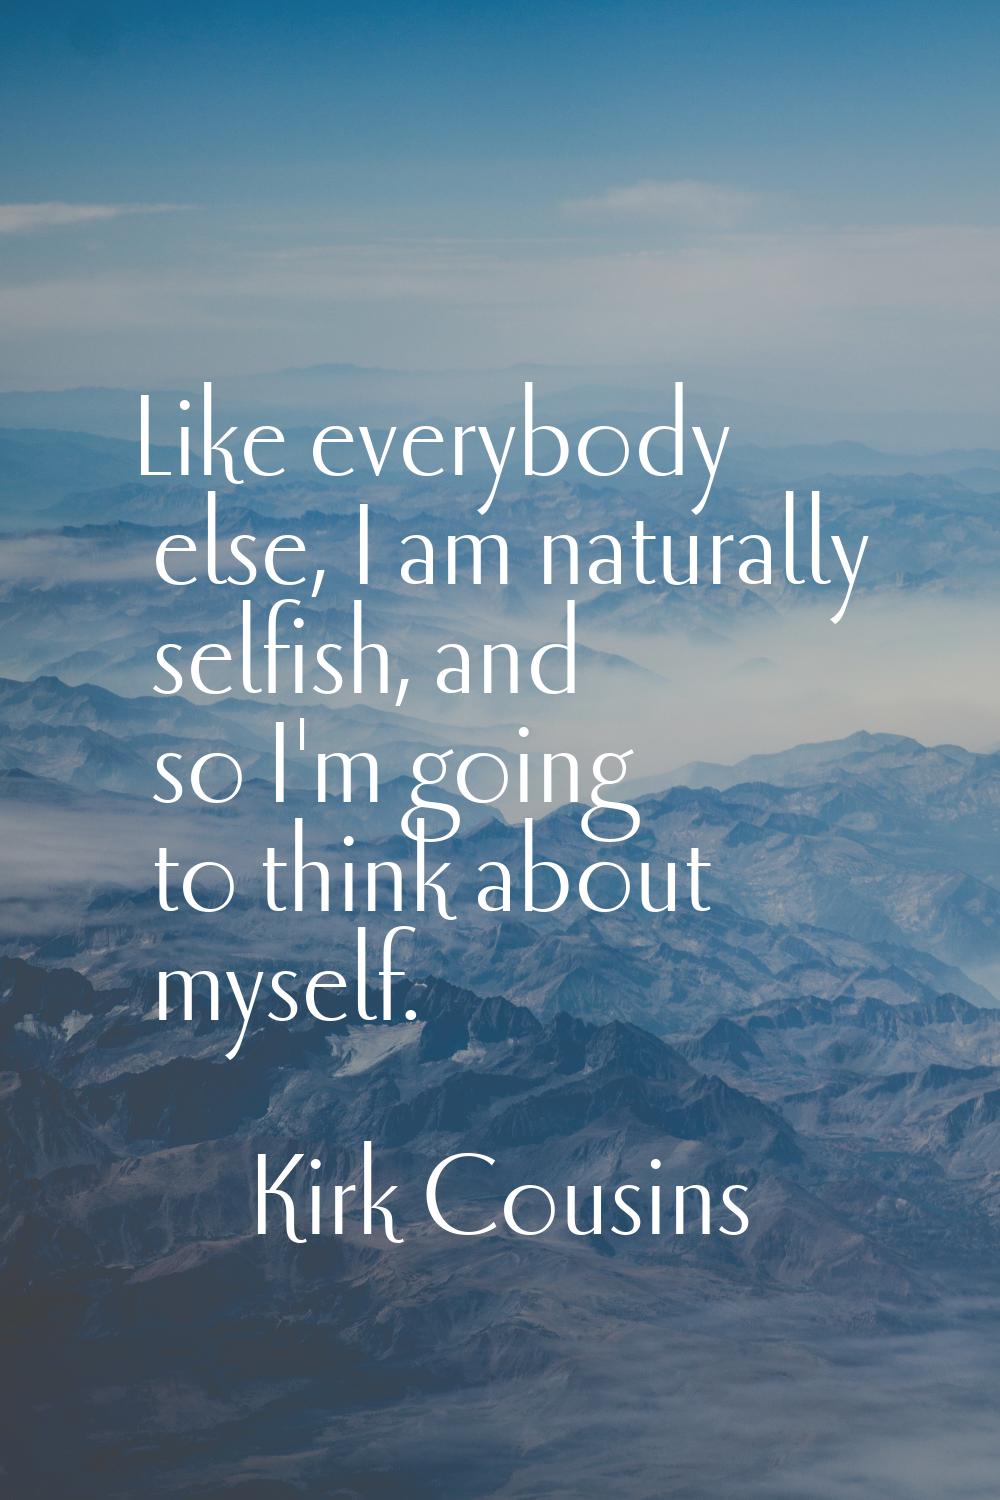 Like everybody else, I am naturally selfish, and so I'm going to think about myself.